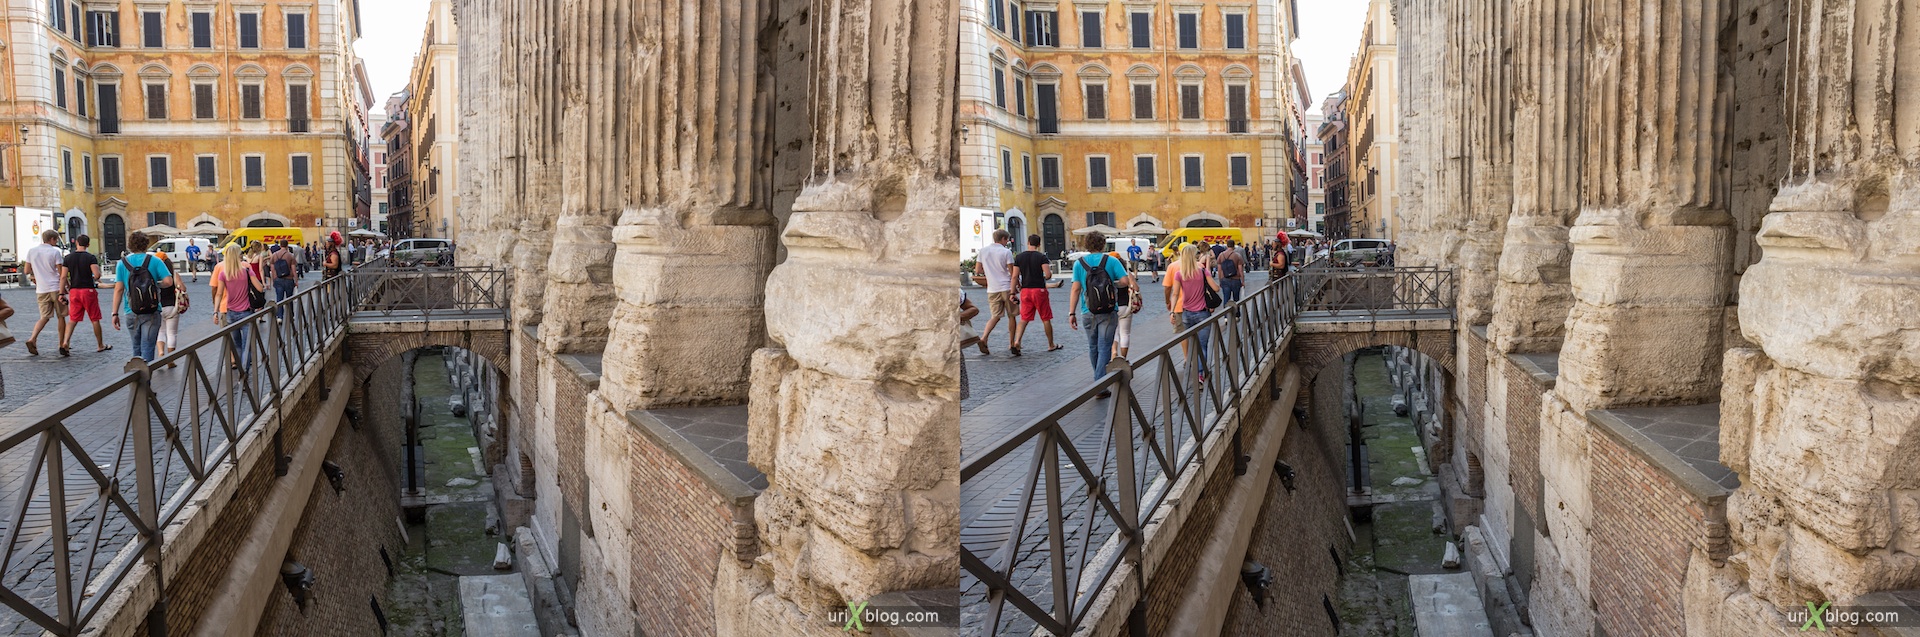 2012, di Pietra square, Rome, Italy, 3D, stereo pair, cross-eyed, crossview, cross view stereo pair